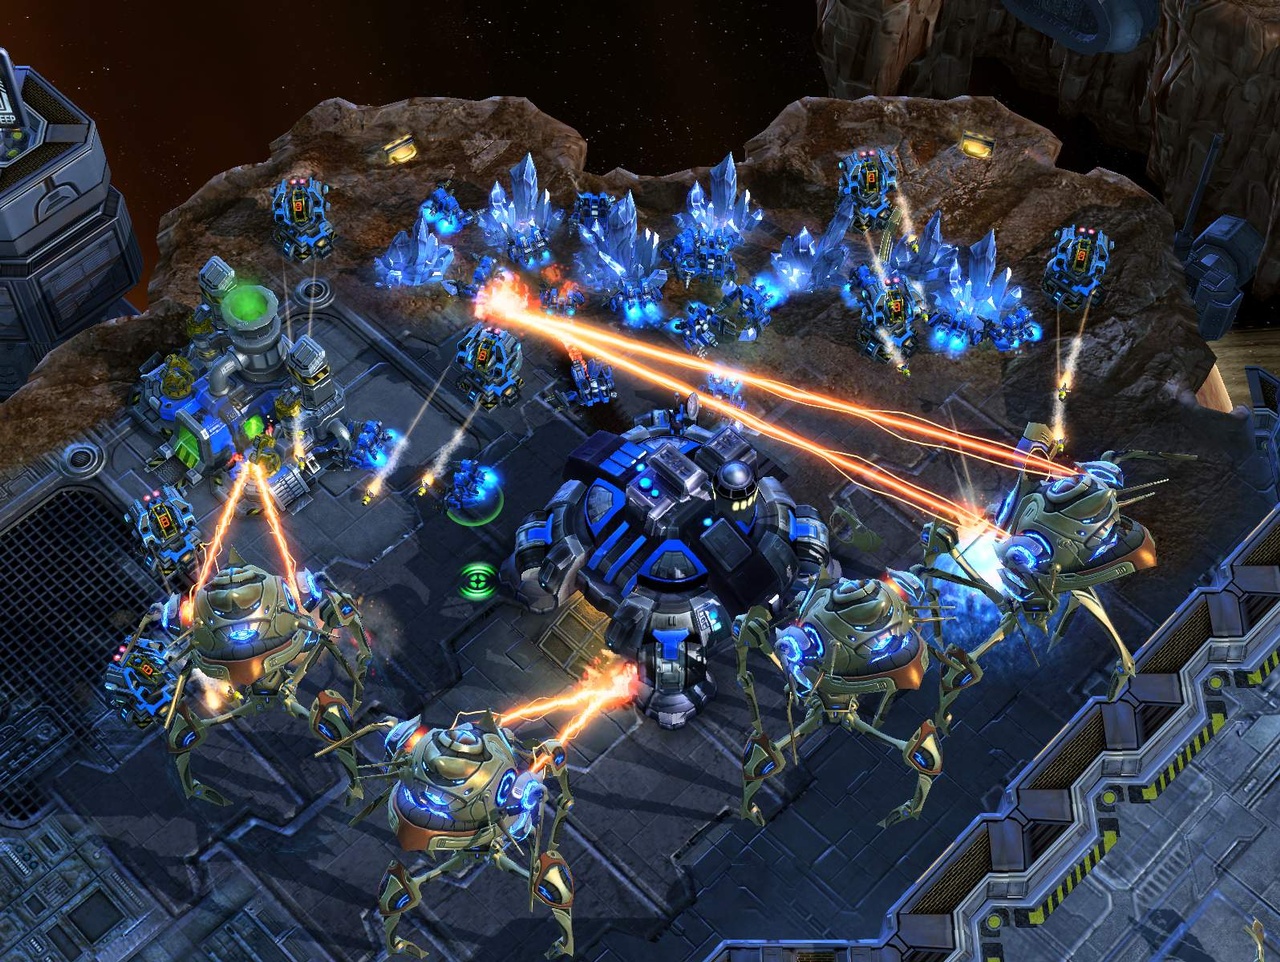 The Protoss colossus will pack some serious firepower.